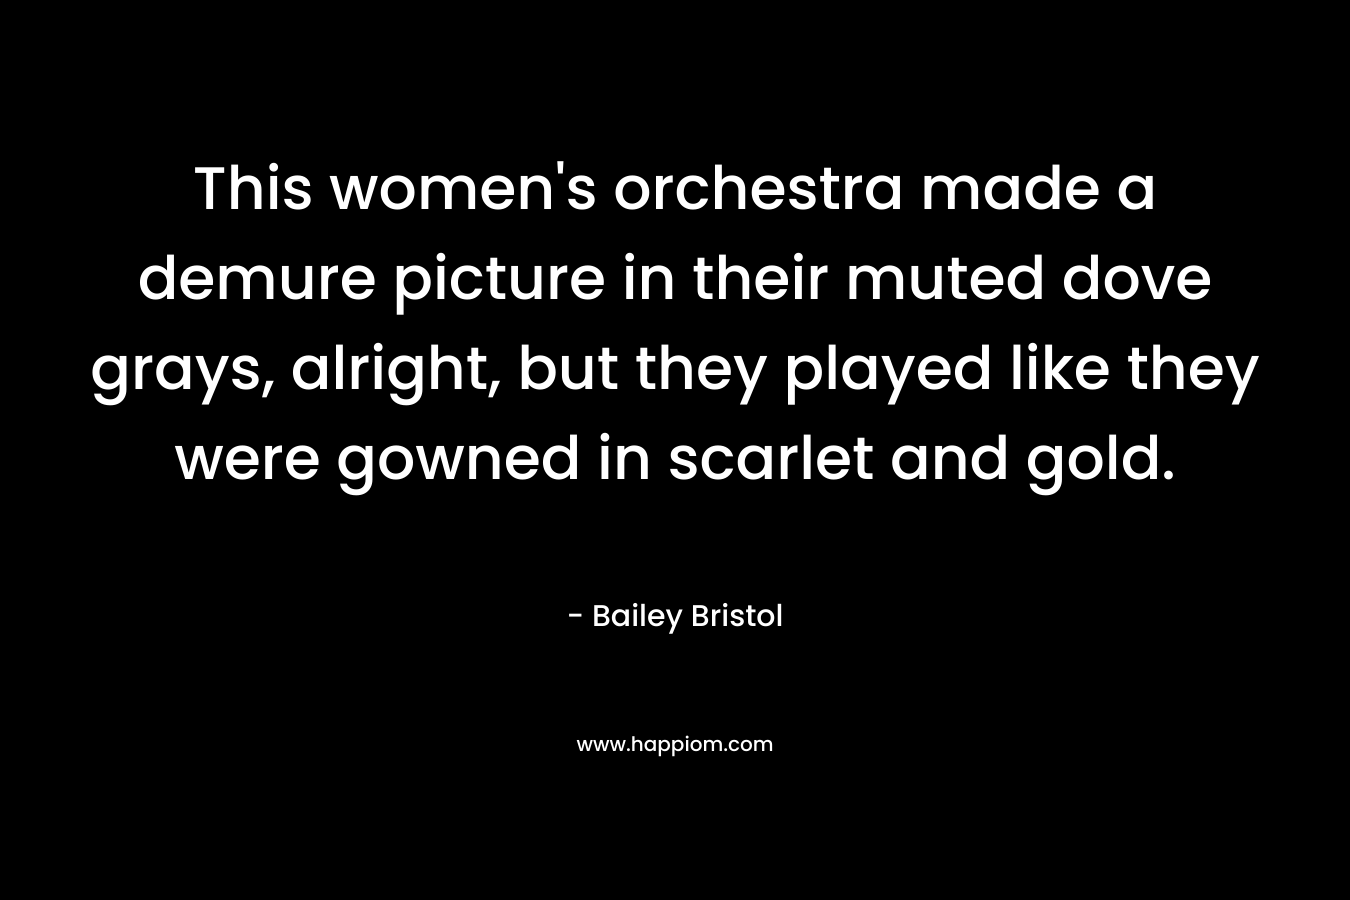 This women’s orchestra made a demure picture in their muted dove grays, alright, but they played like they were gowned in scarlet and gold. – Bailey Bristol